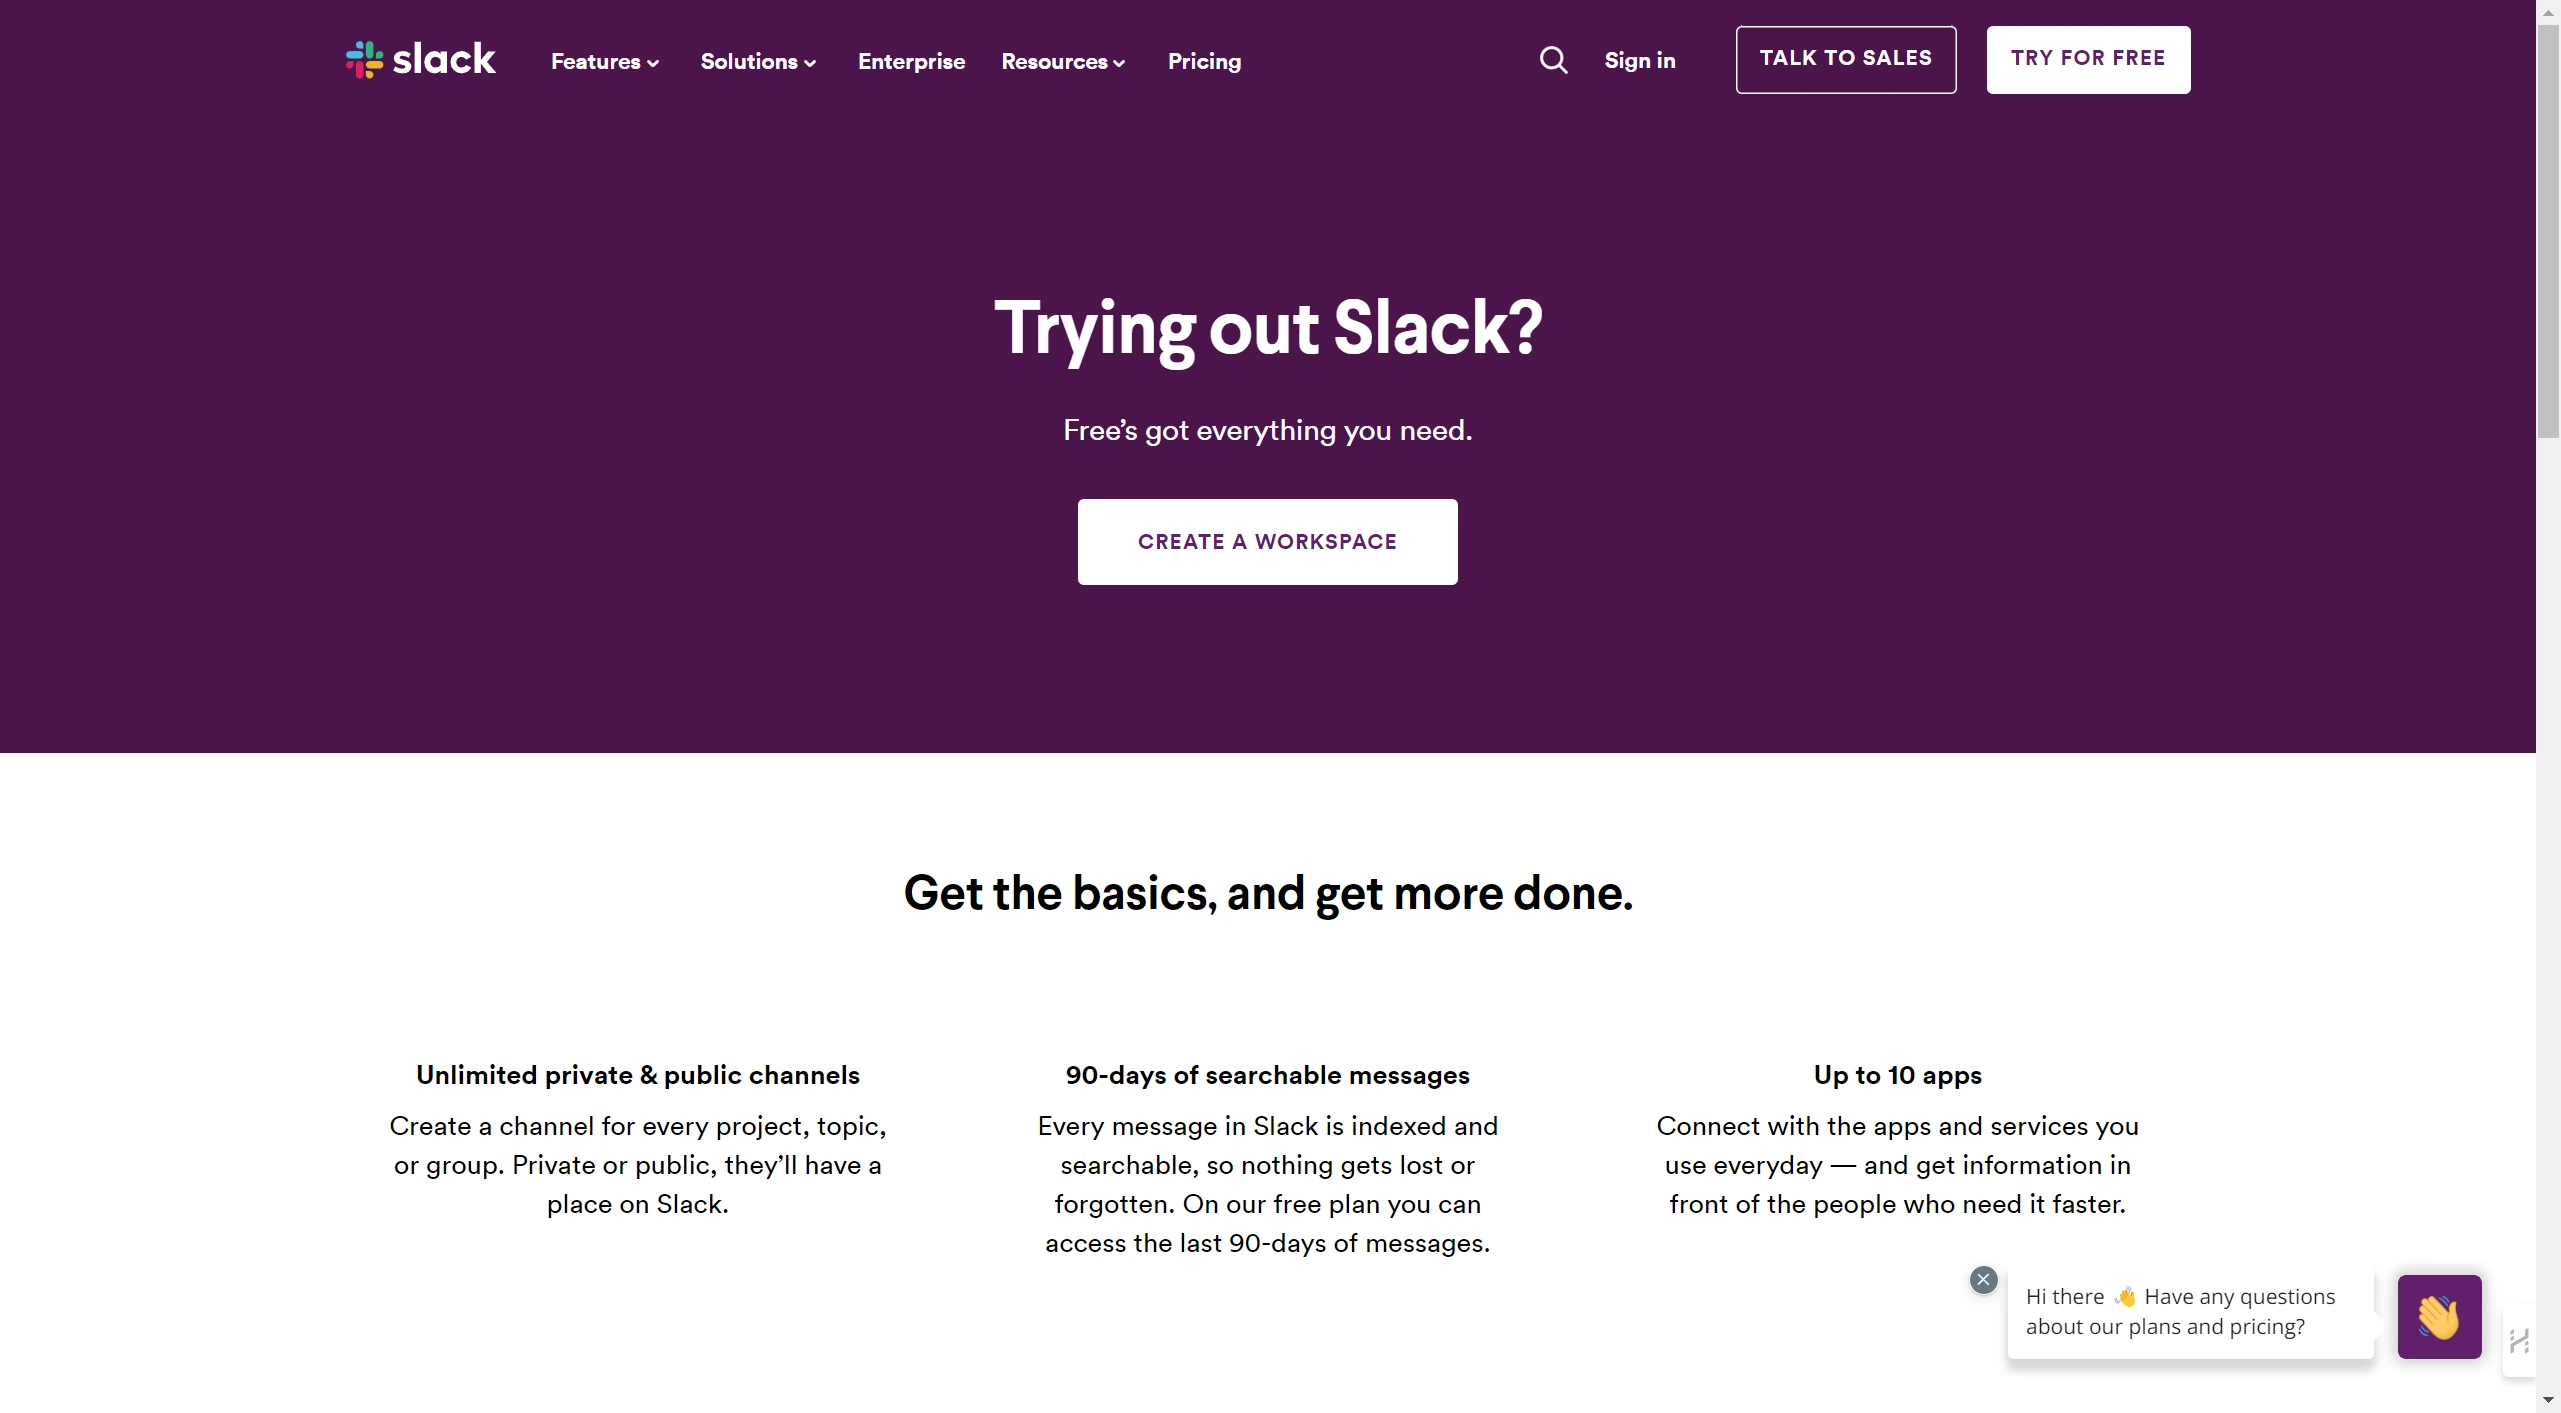 Slack's Landing Page for visitors to sign up for their free plan and try it out.